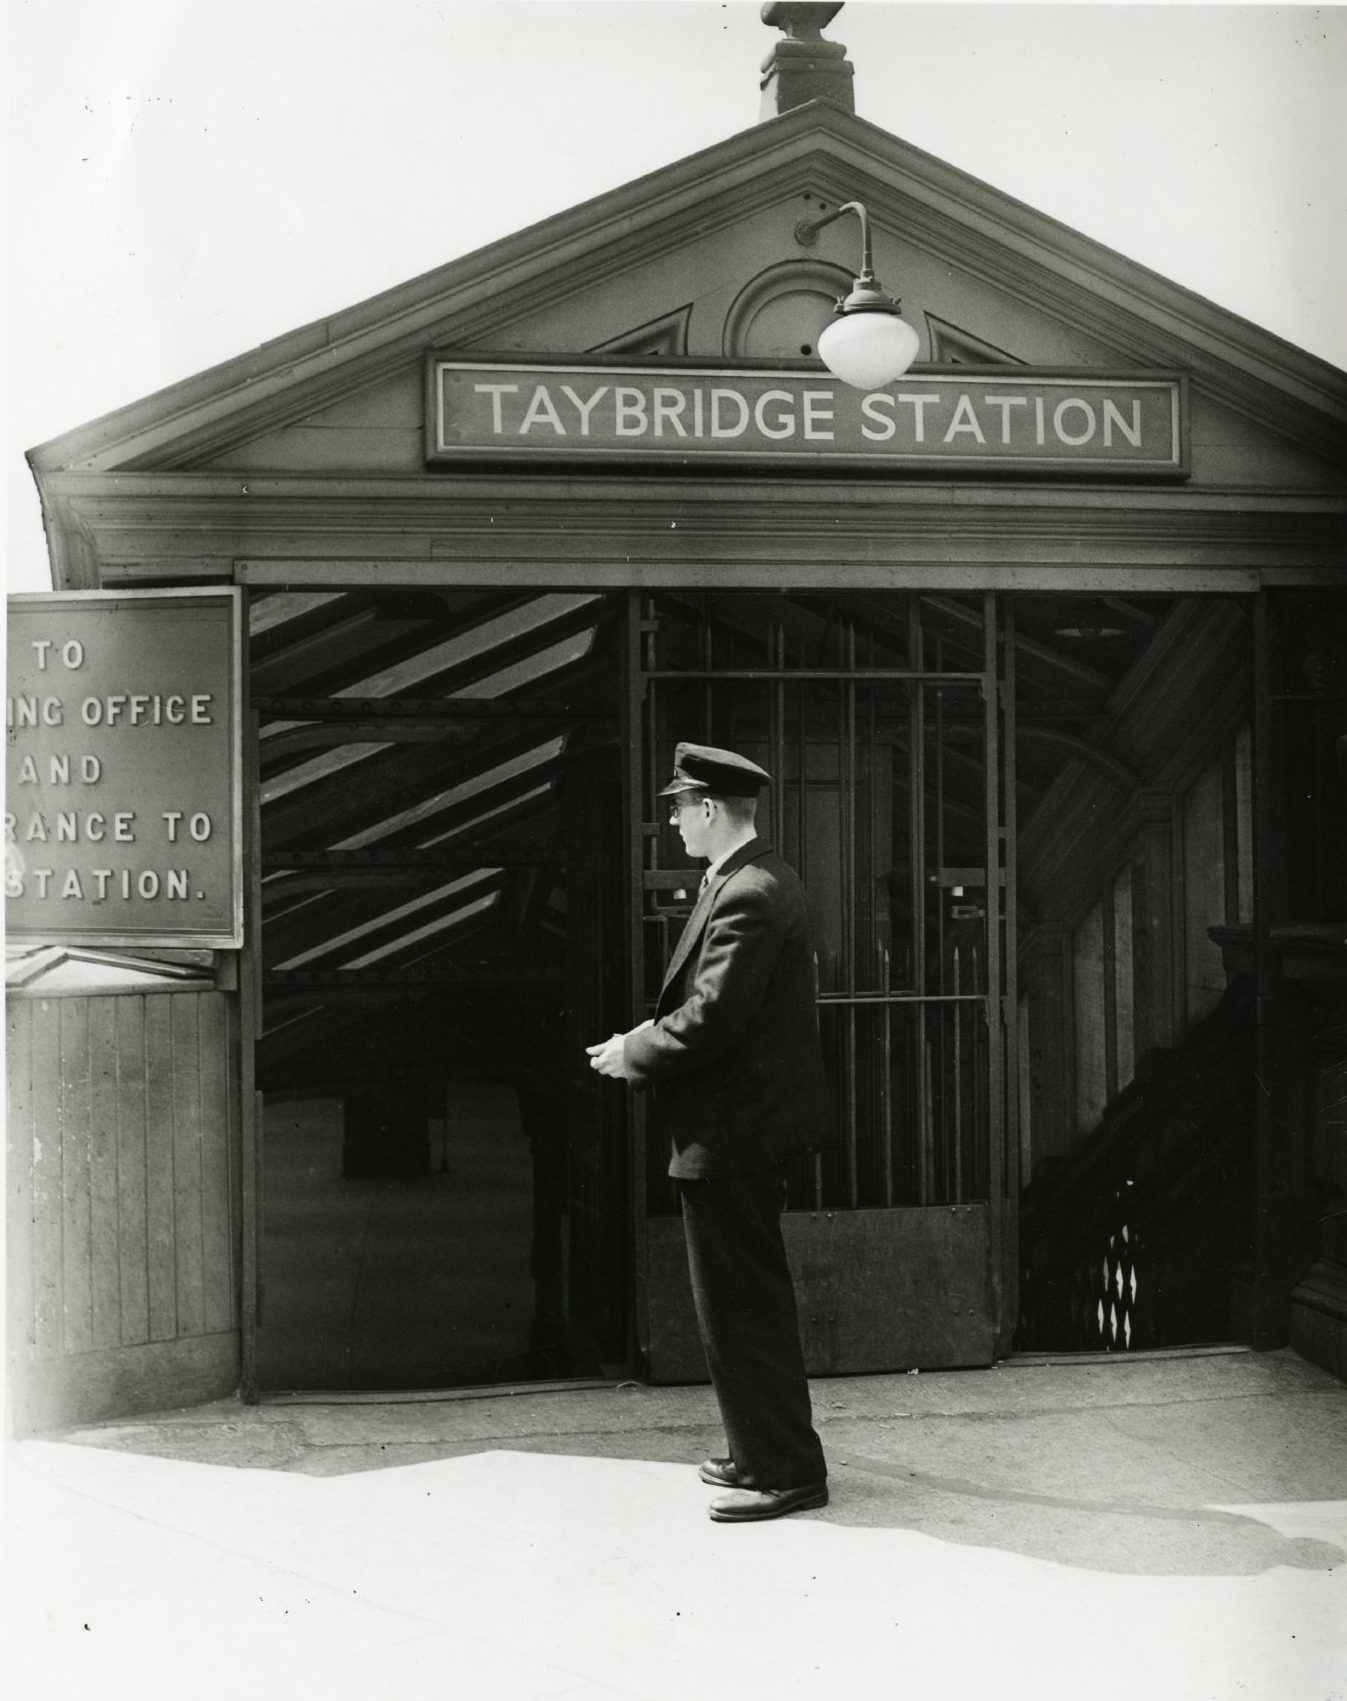 A railway employee at the Tay Bridge Station entrance in the early 20th Century.